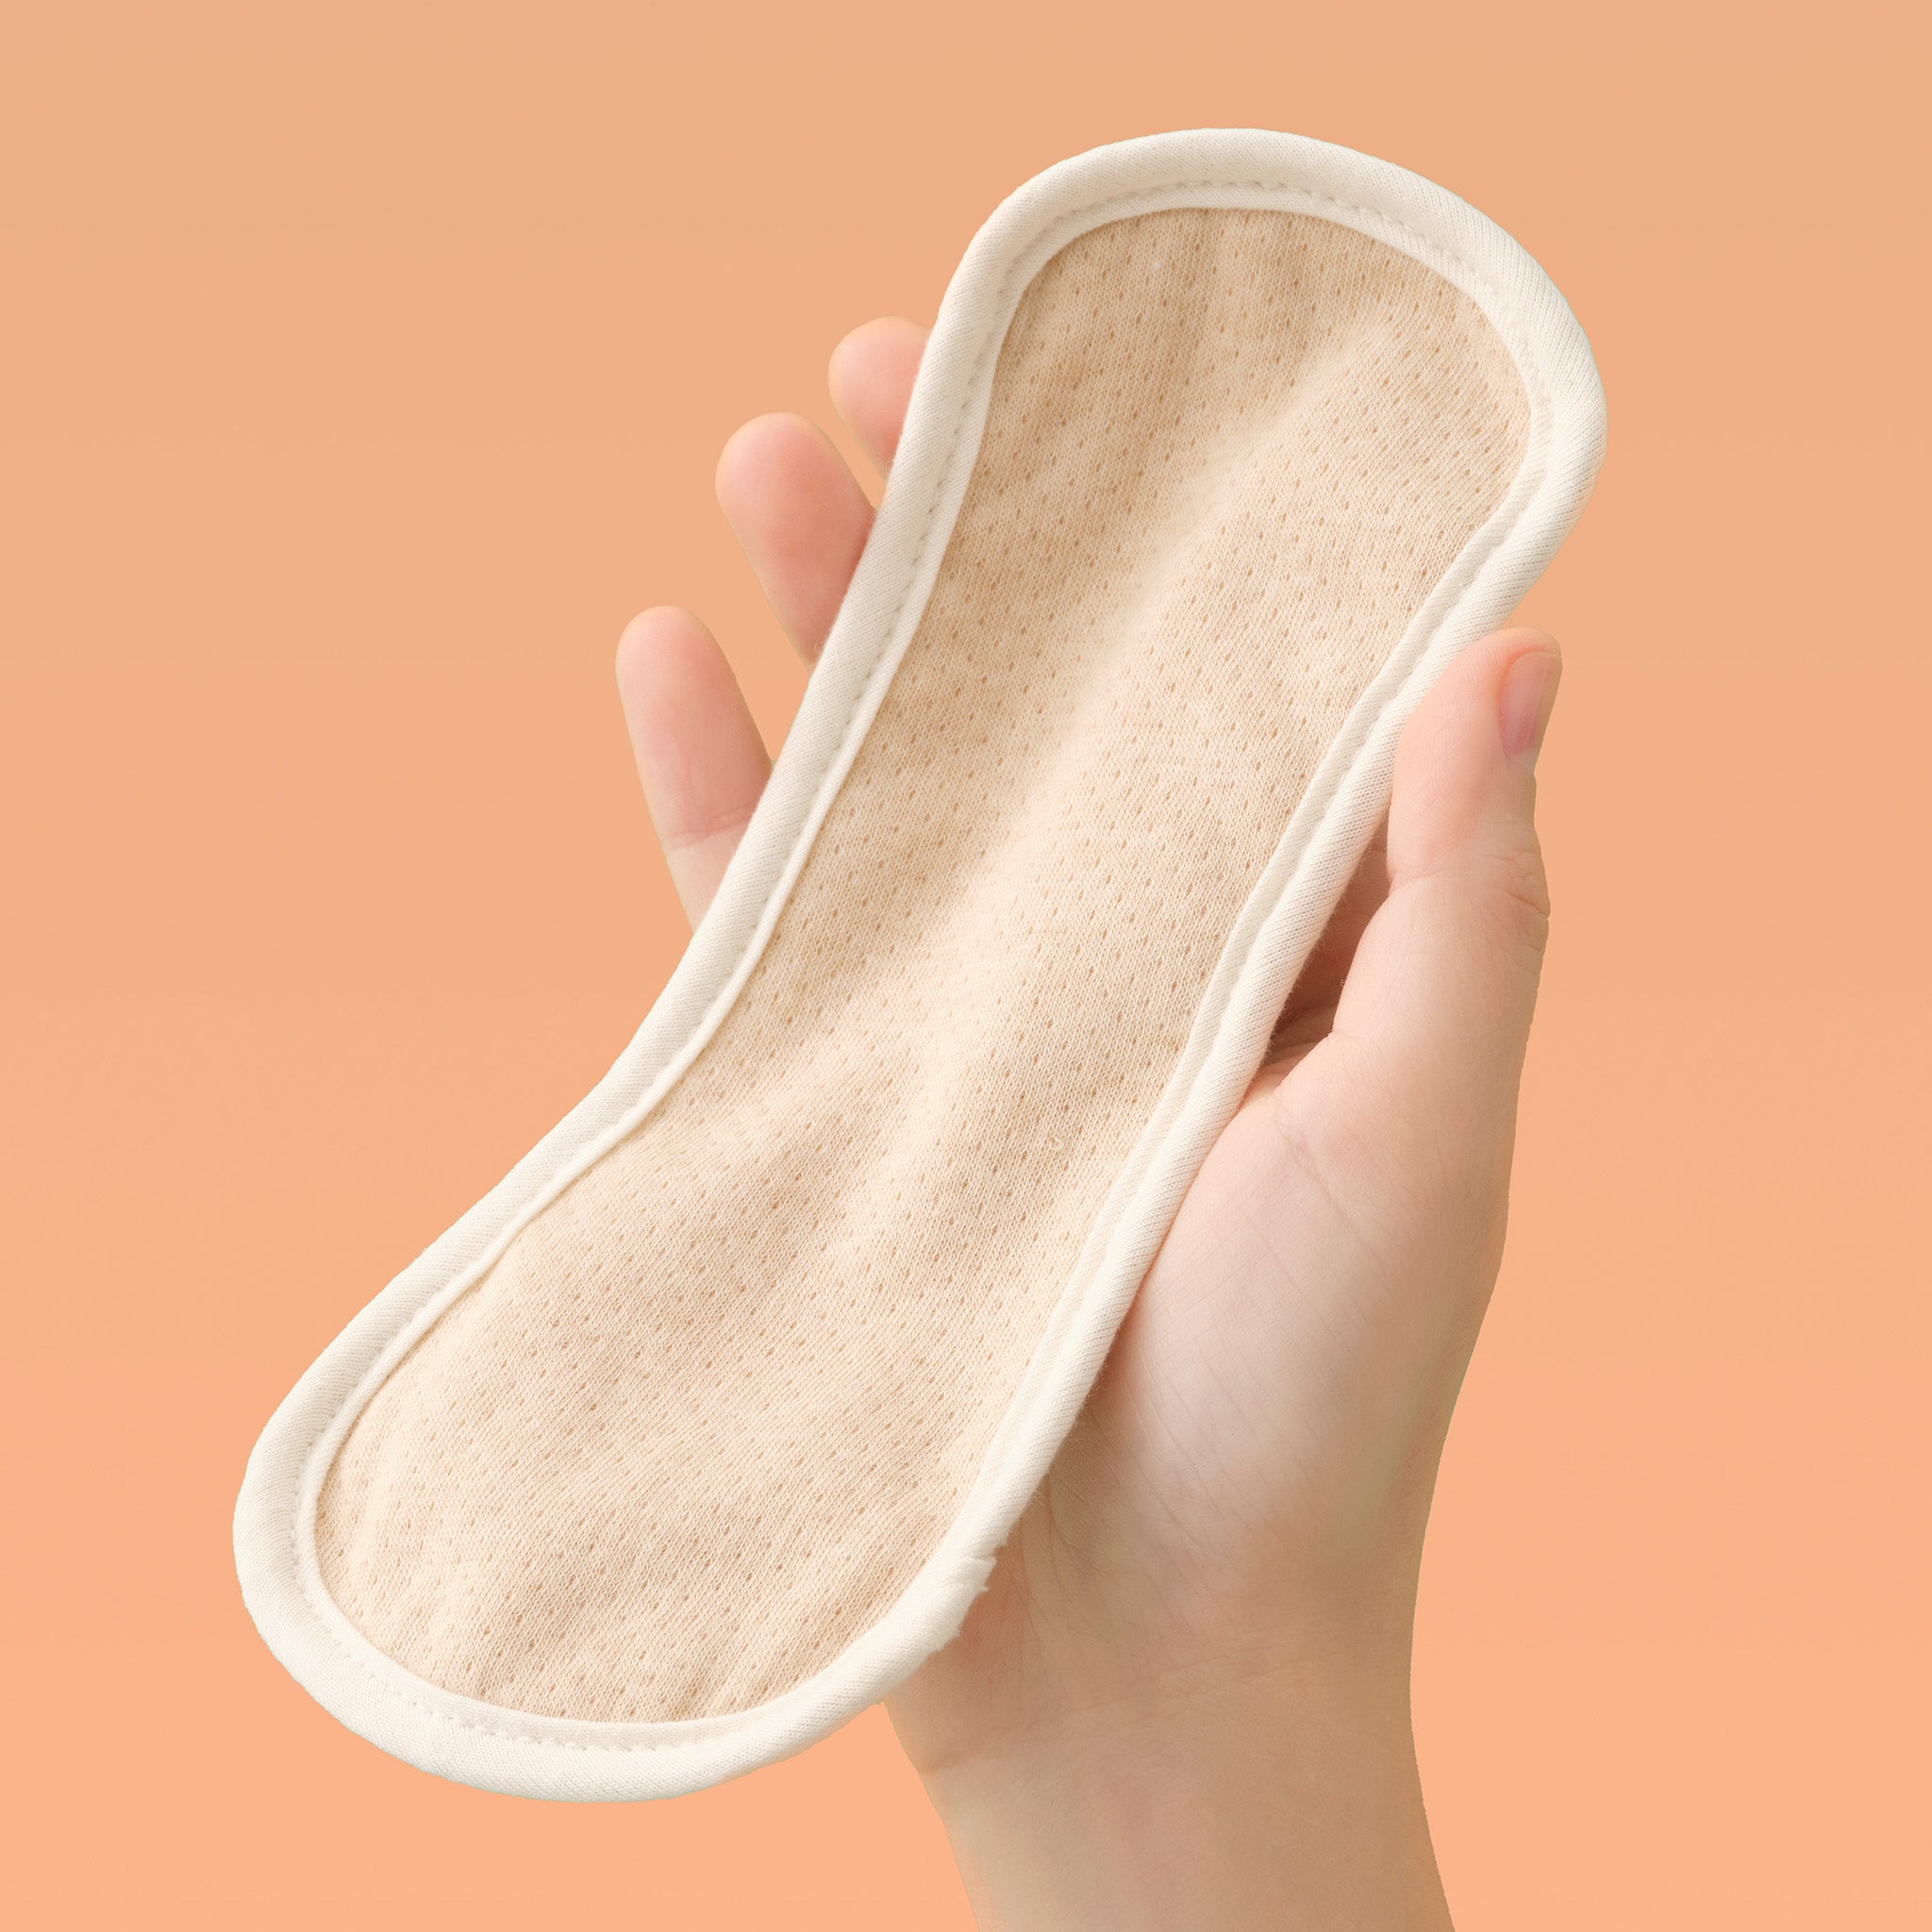 Are Panty Liners Good?